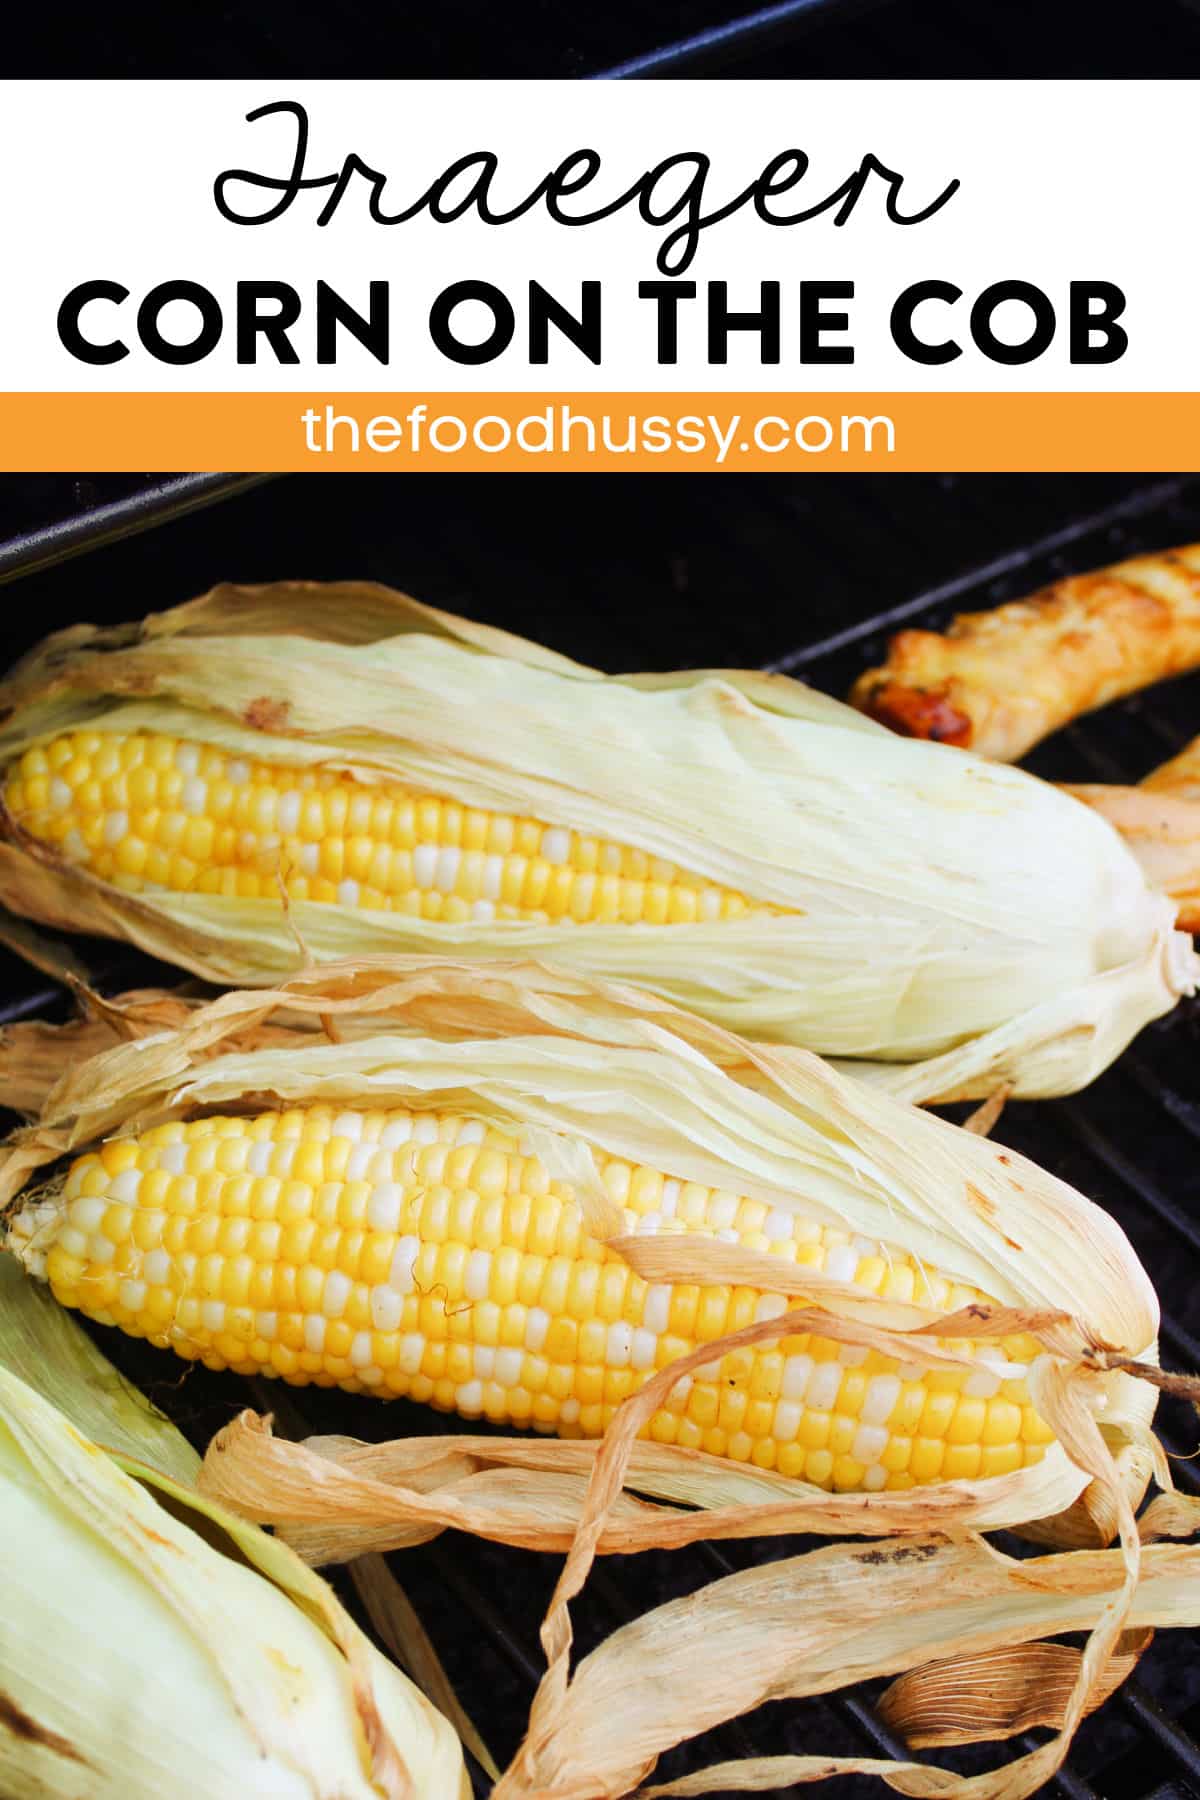 Traeger corn on the cob is one of those summer staples that I'm obsessed with! Being from Iowa - I can never get enough fresh corn - summertime and farmers markets are my favorite! The best part is - grilled corn on the cob is super simple! via @foodhussy